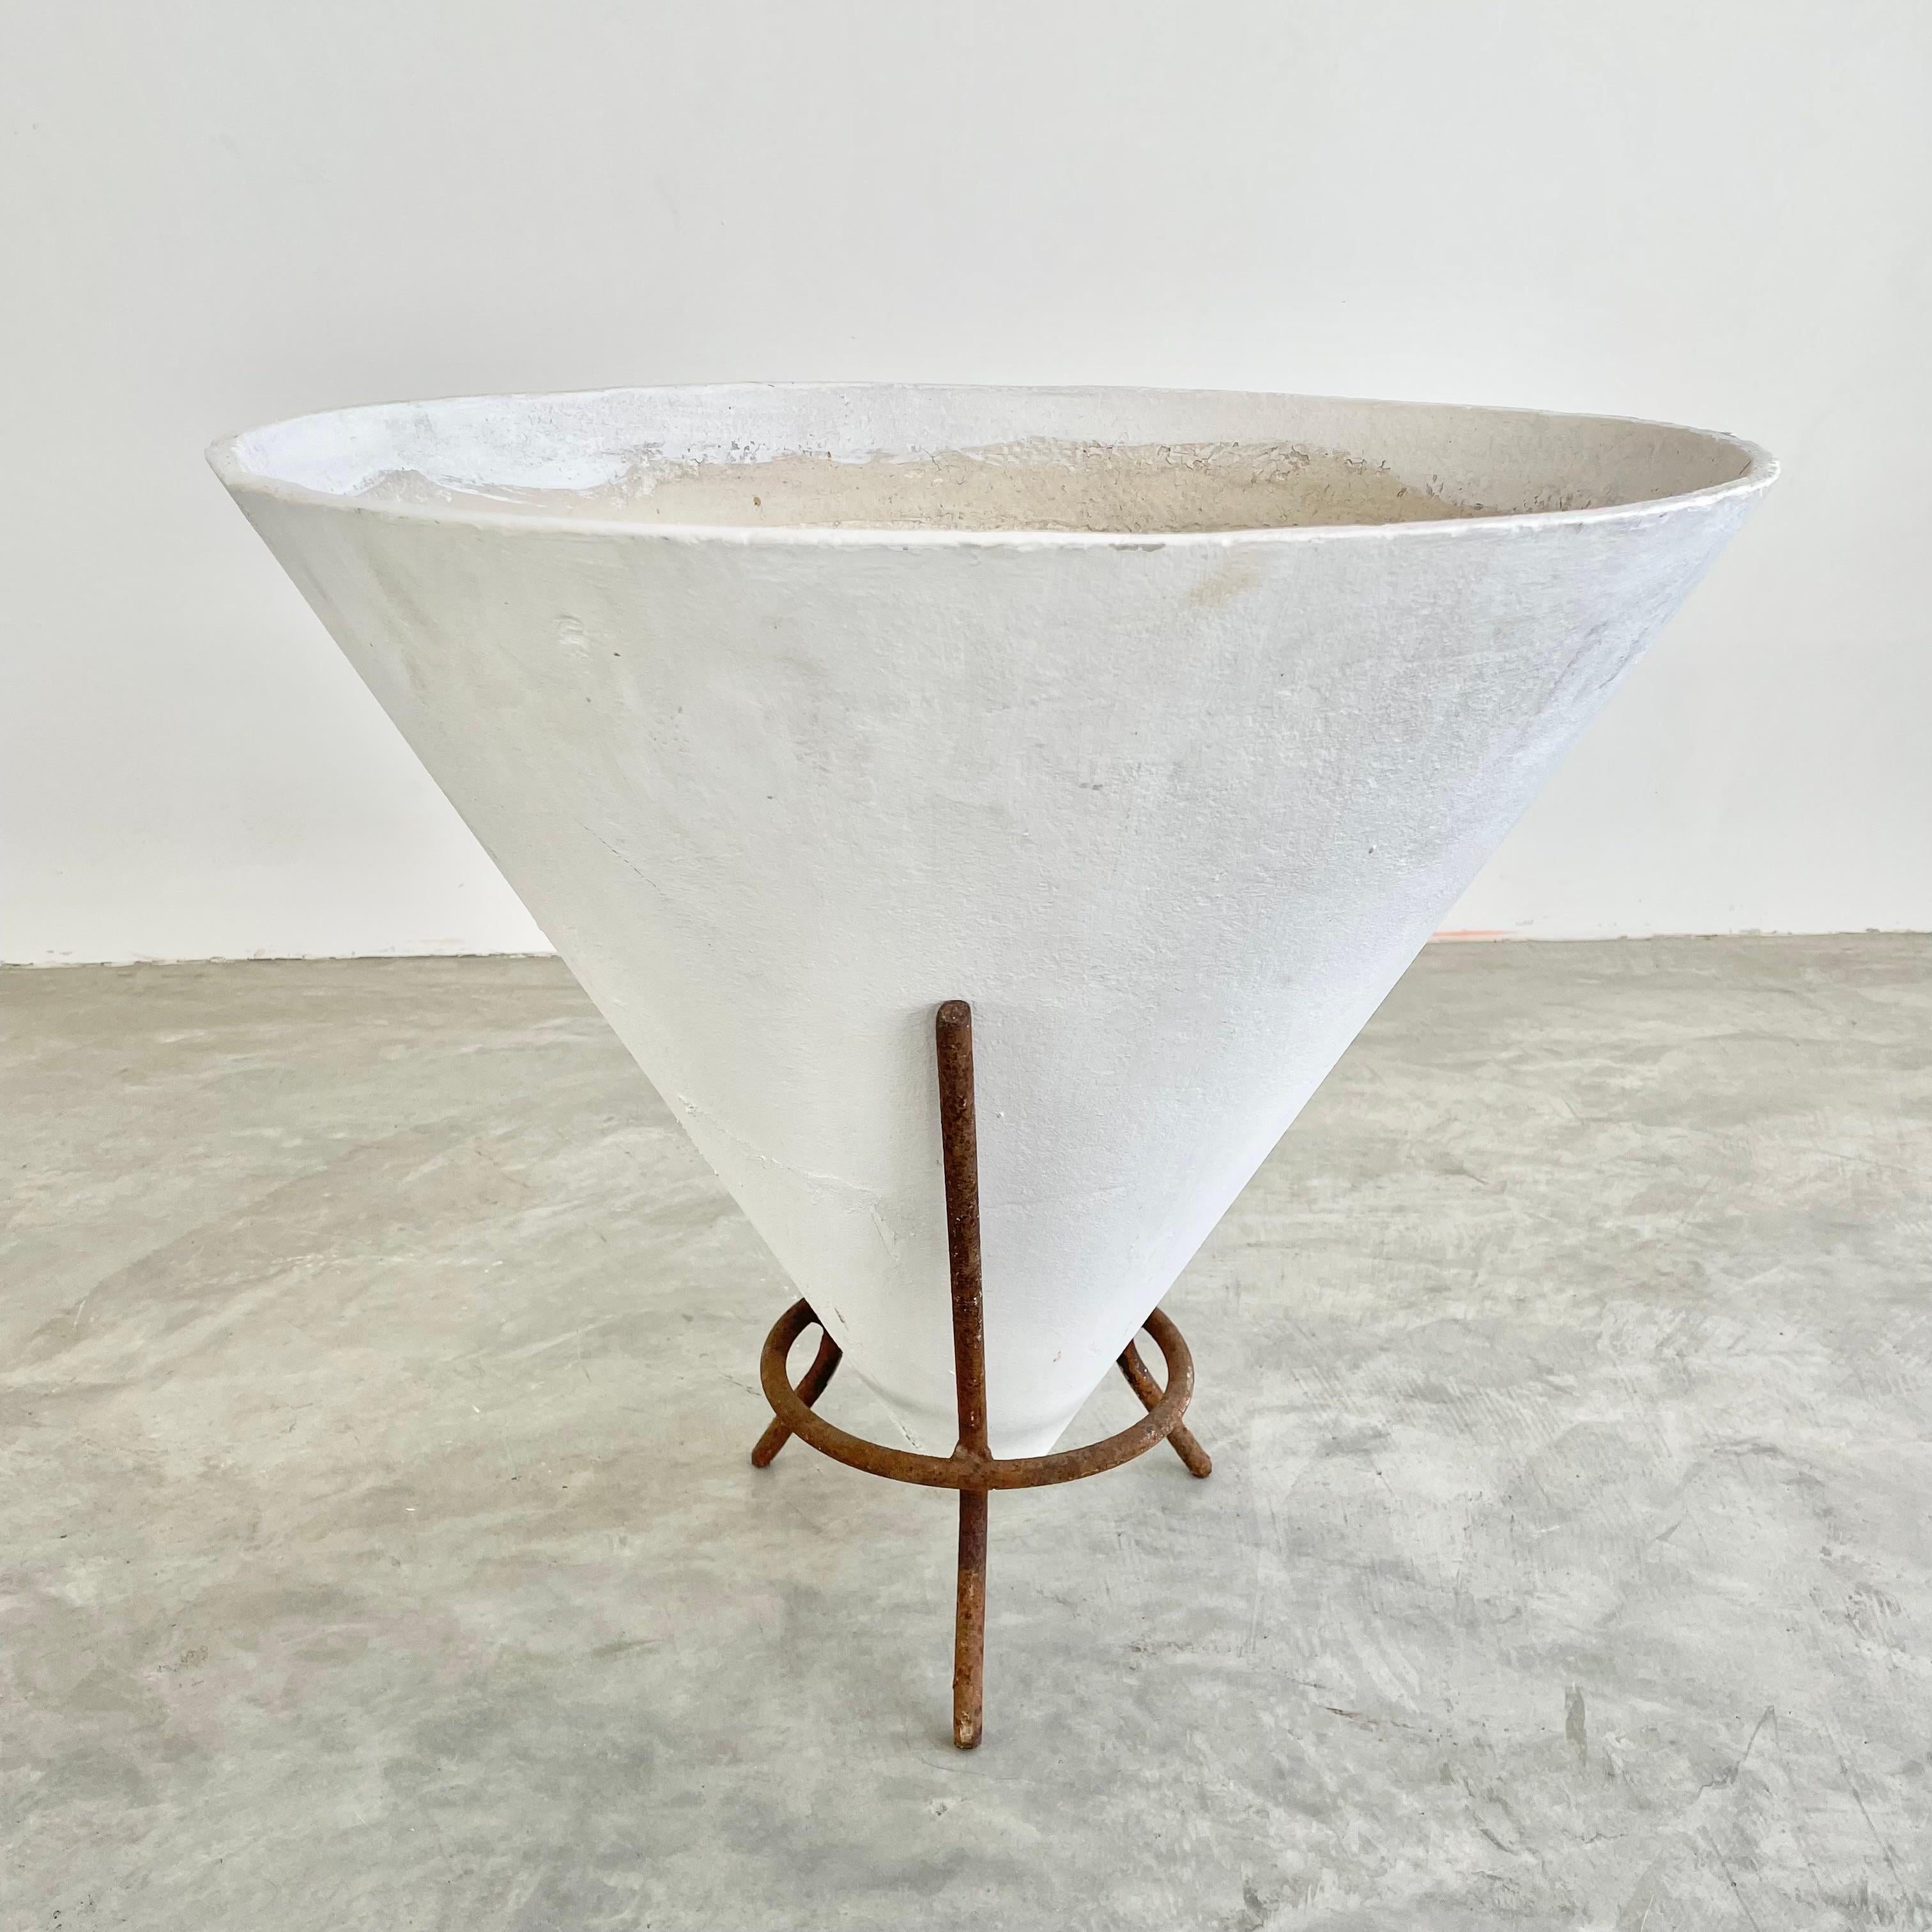 Willy Guhl Concrete Cone Planter on Iron Stand, 1960s Switzerland For Sale 2